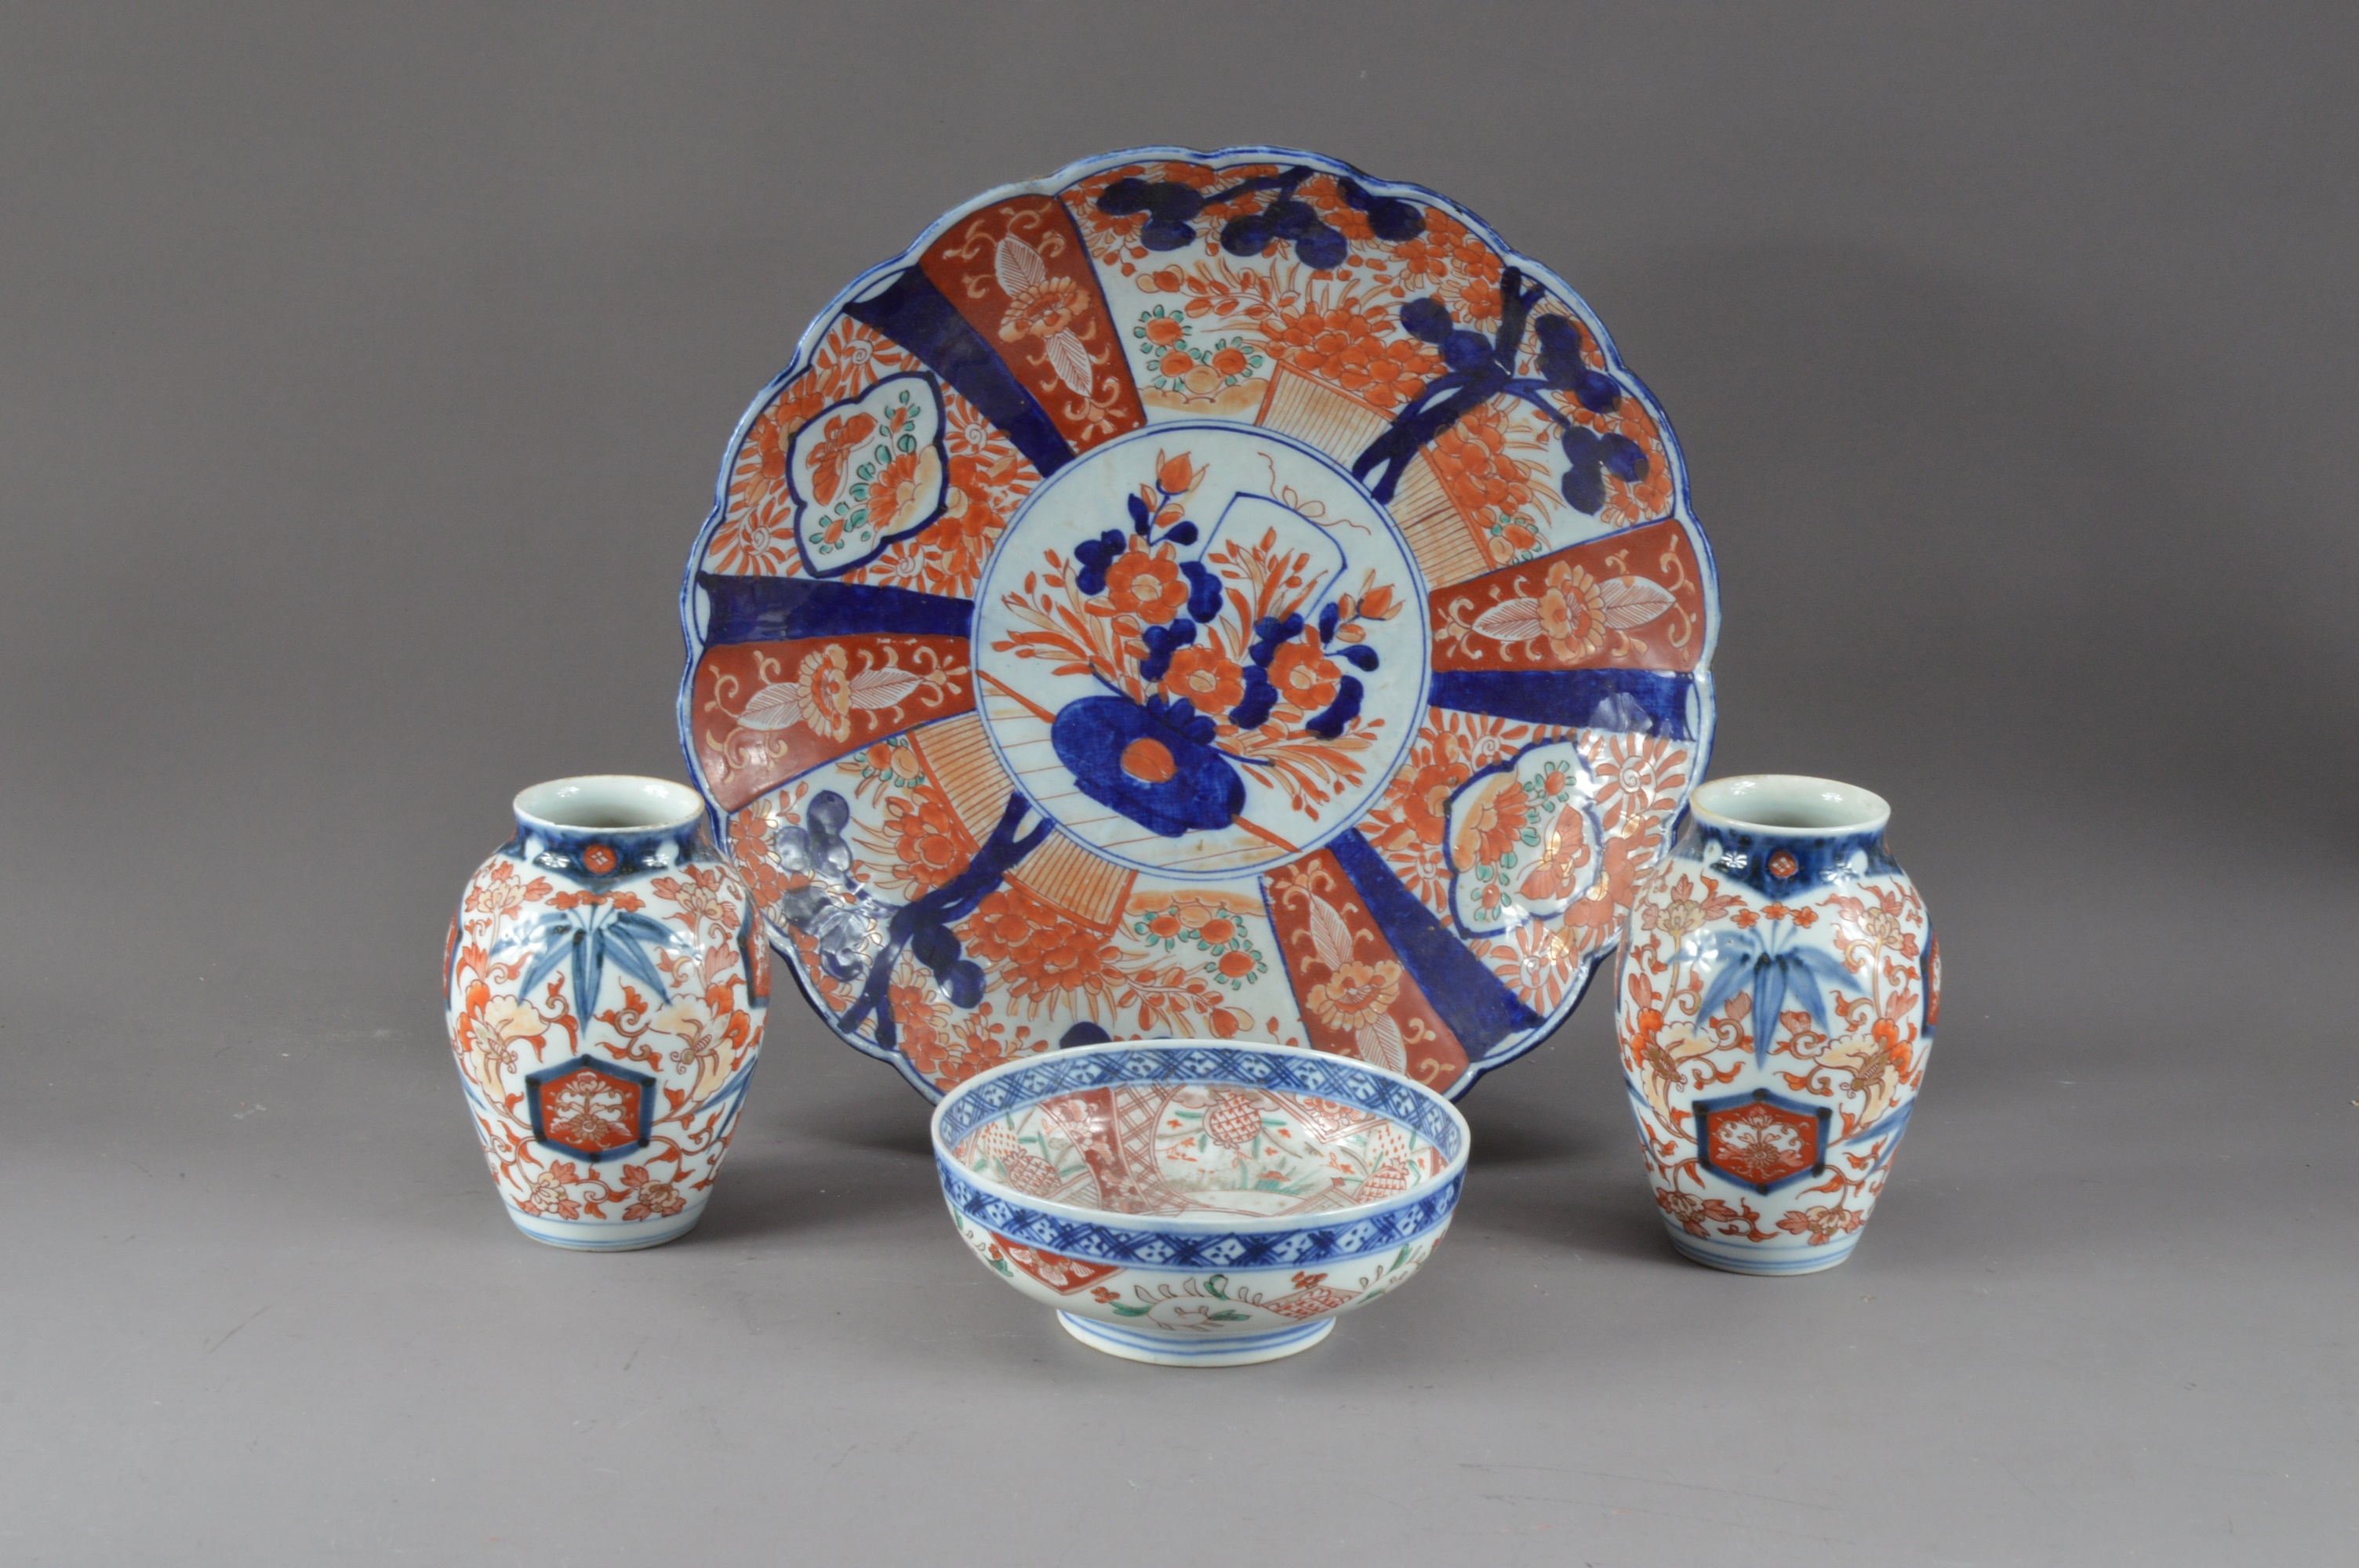 Four items of 20th century Chinese Imari porcelain wares